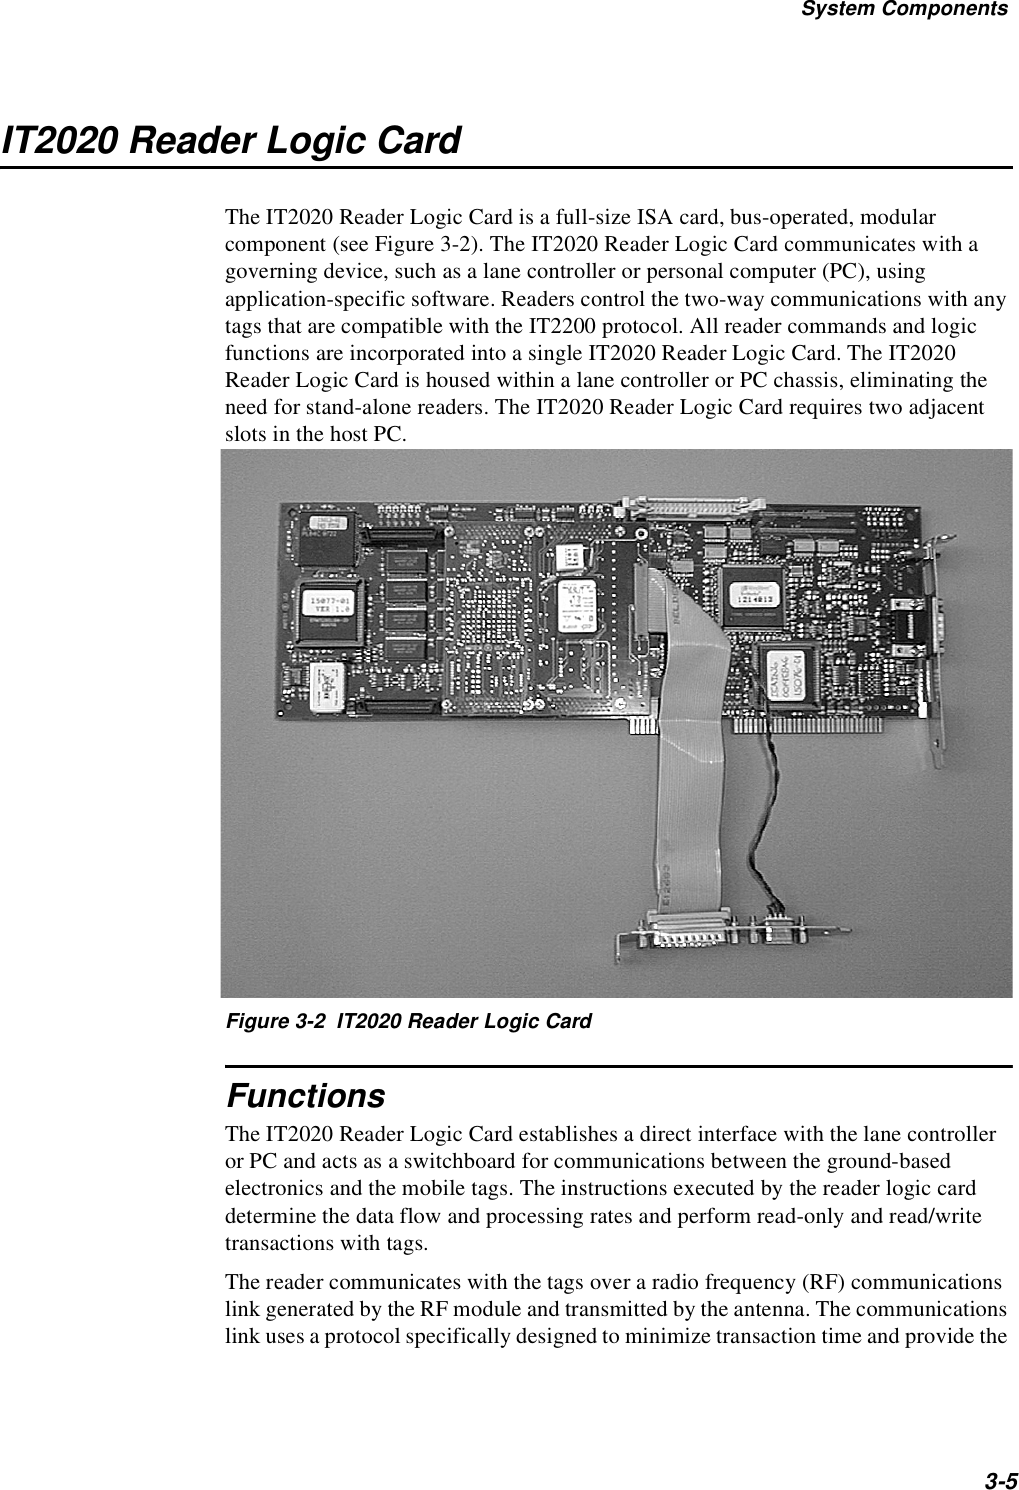 System Components3-5IT2020 Reader Logic CardThe IT2020 Reader Logic Card is a full-size ISA card, bus-operated, modular component (see Figure 3-2). The IT2020 Reader Logic Card communicates with a governing device, such as a lane controller or personal computer (PC), using application-specific software. Readers control the two-way communications with any tags that are compatible with the IT2200 protocol. All reader commands and logic functions are incorporated into a single IT2020 Reader Logic Card. The IT2020 Reader Logic Card is housed within a lane controller or PC chassis, eliminating the need for stand-alone readers. The IT2020 Reader Logic Card requires two adjacent slots in the host PC.Figure 3-2  IT2020 Reader Logic CardFunctionsThe IT2020 Reader Logic Card establishes a direct interface with the lane controller or PC and acts as a switchboard for communications between the ground-based electronics and the mobile tags. The instructions executed by the reader logic card determine the data flow and processing rates and perform read-only and read/write transactions with tags.The reader communicates with the tags over a radio frequency (RF) communications link generated by the RF module and transmitted by the antenna. The communications link uses a protocol specifically designed to minimize transaction time and provide the 